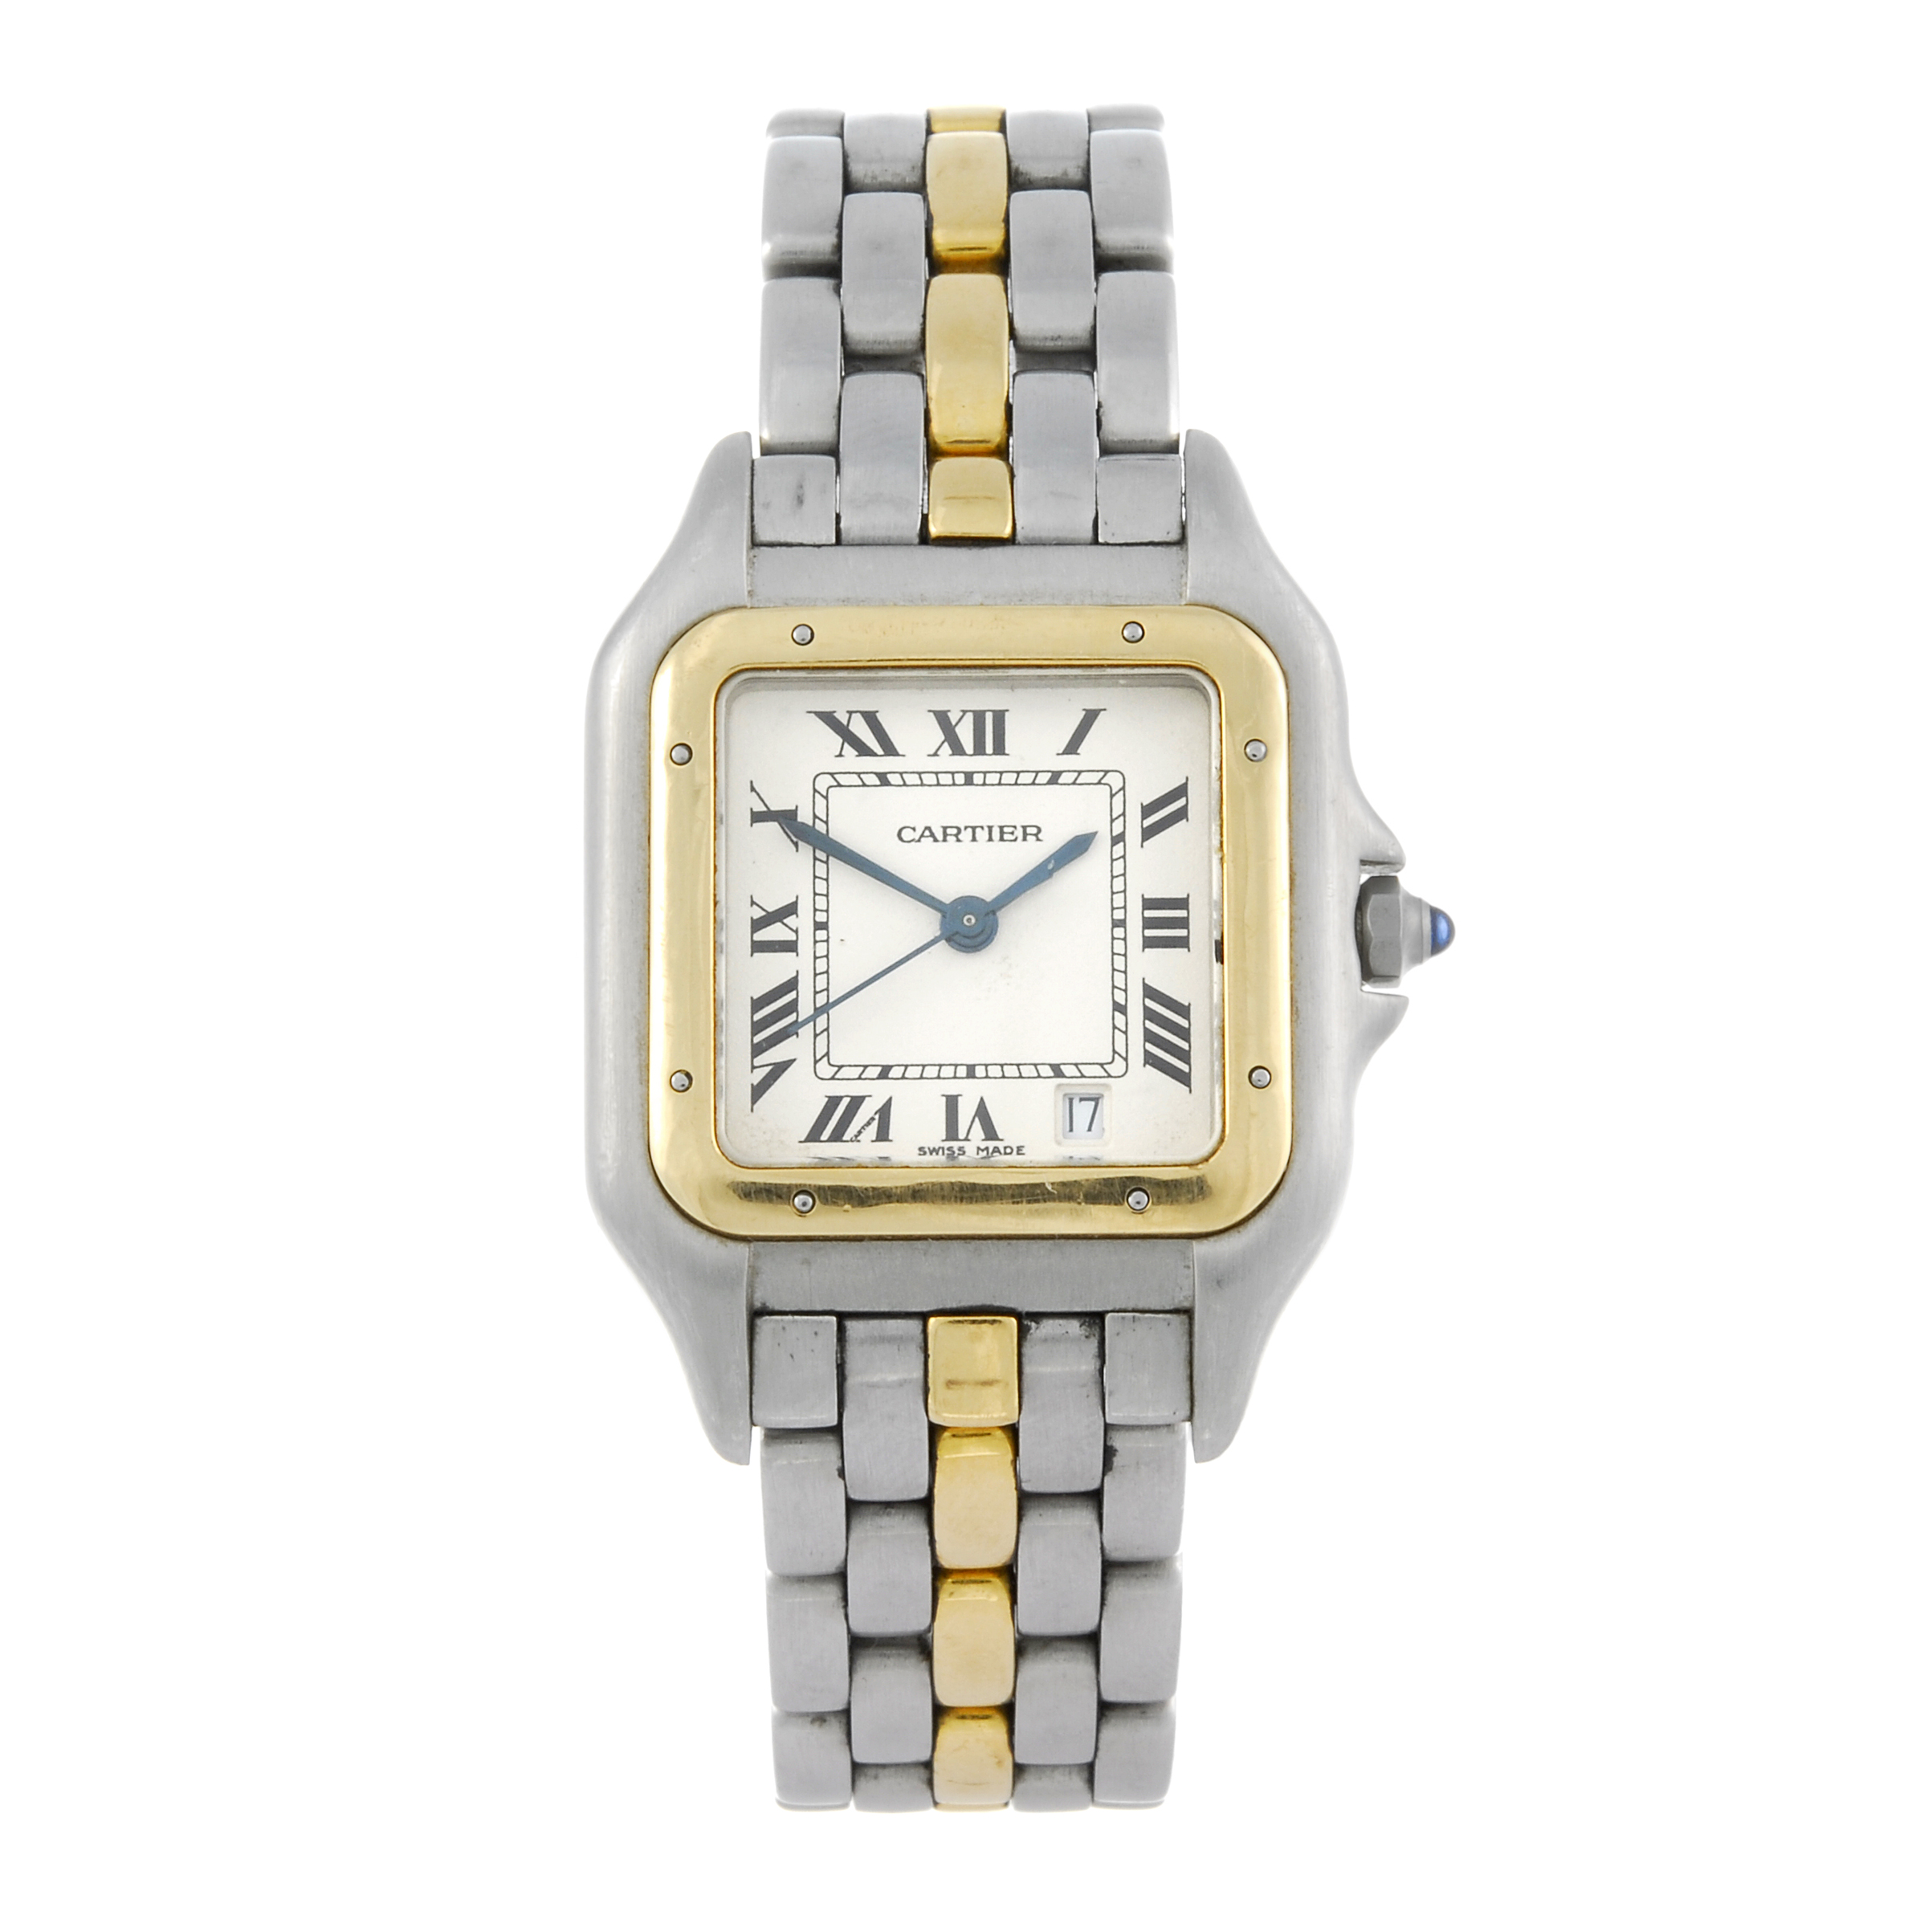 CARTIER - a Panthere bracelet watch. Stainless steel case with yellow metal bezel. Numbered